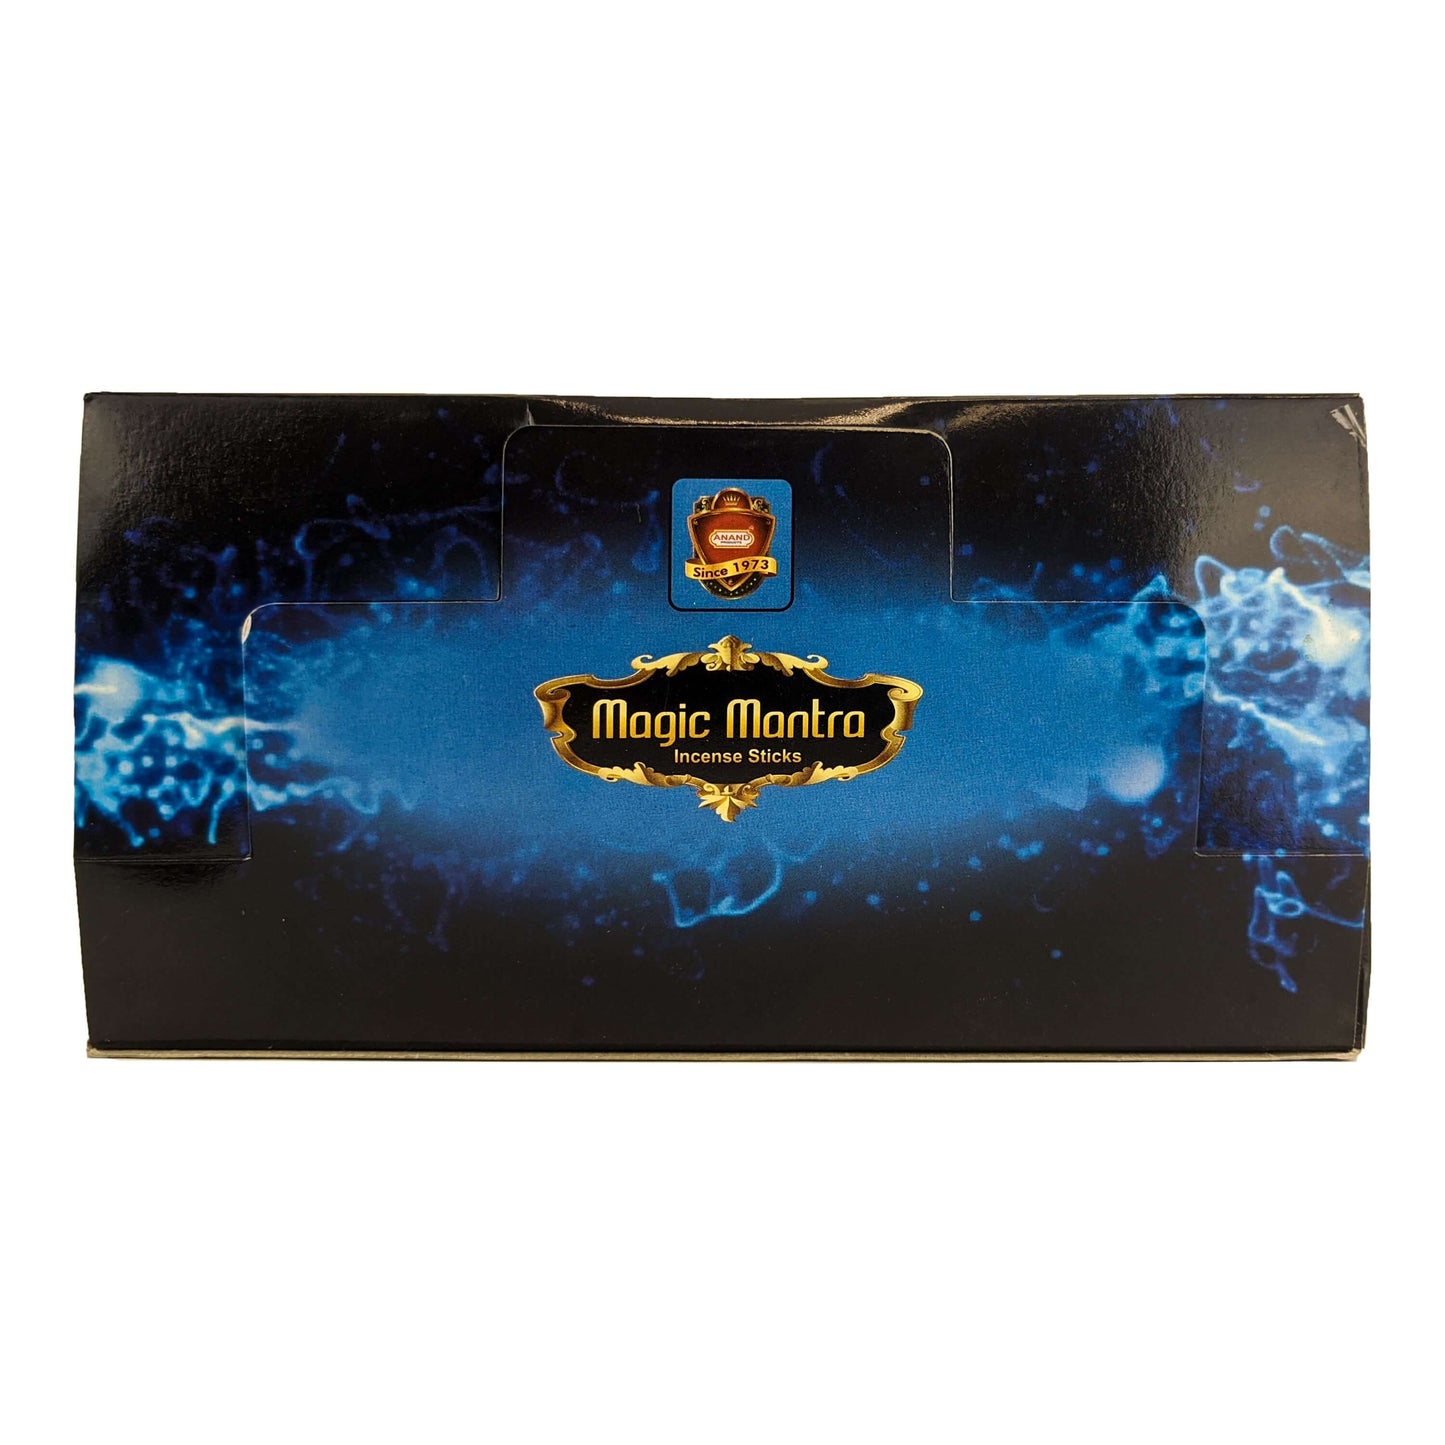 Anand Magic Mantra Incense Sticks, 15g Pack